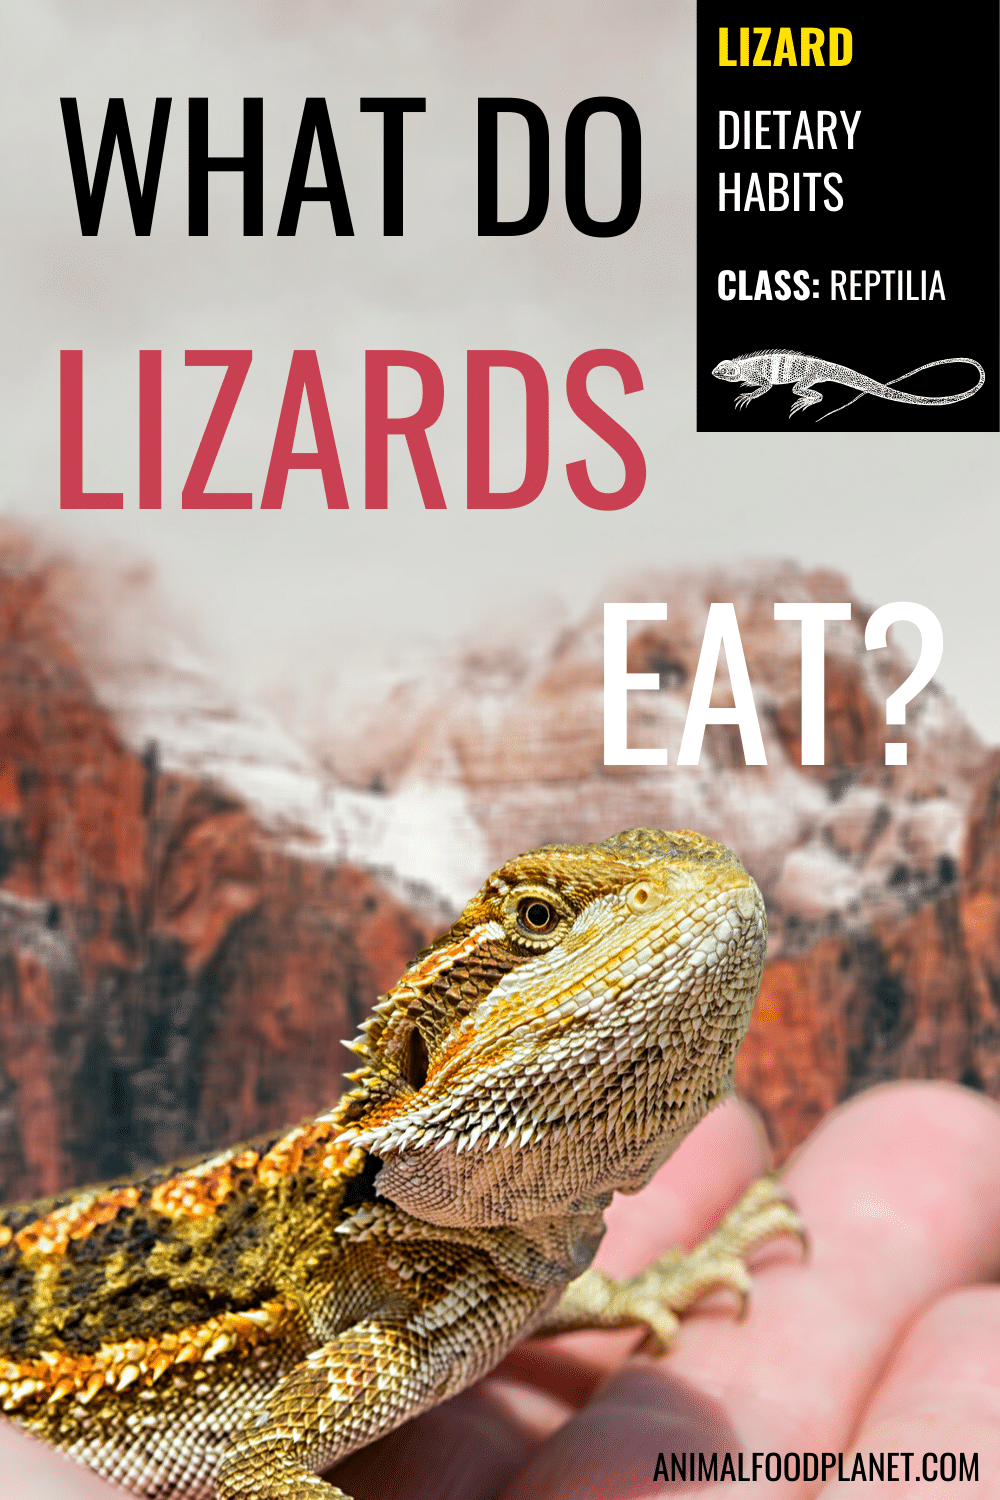 What Do Lizards Eat?